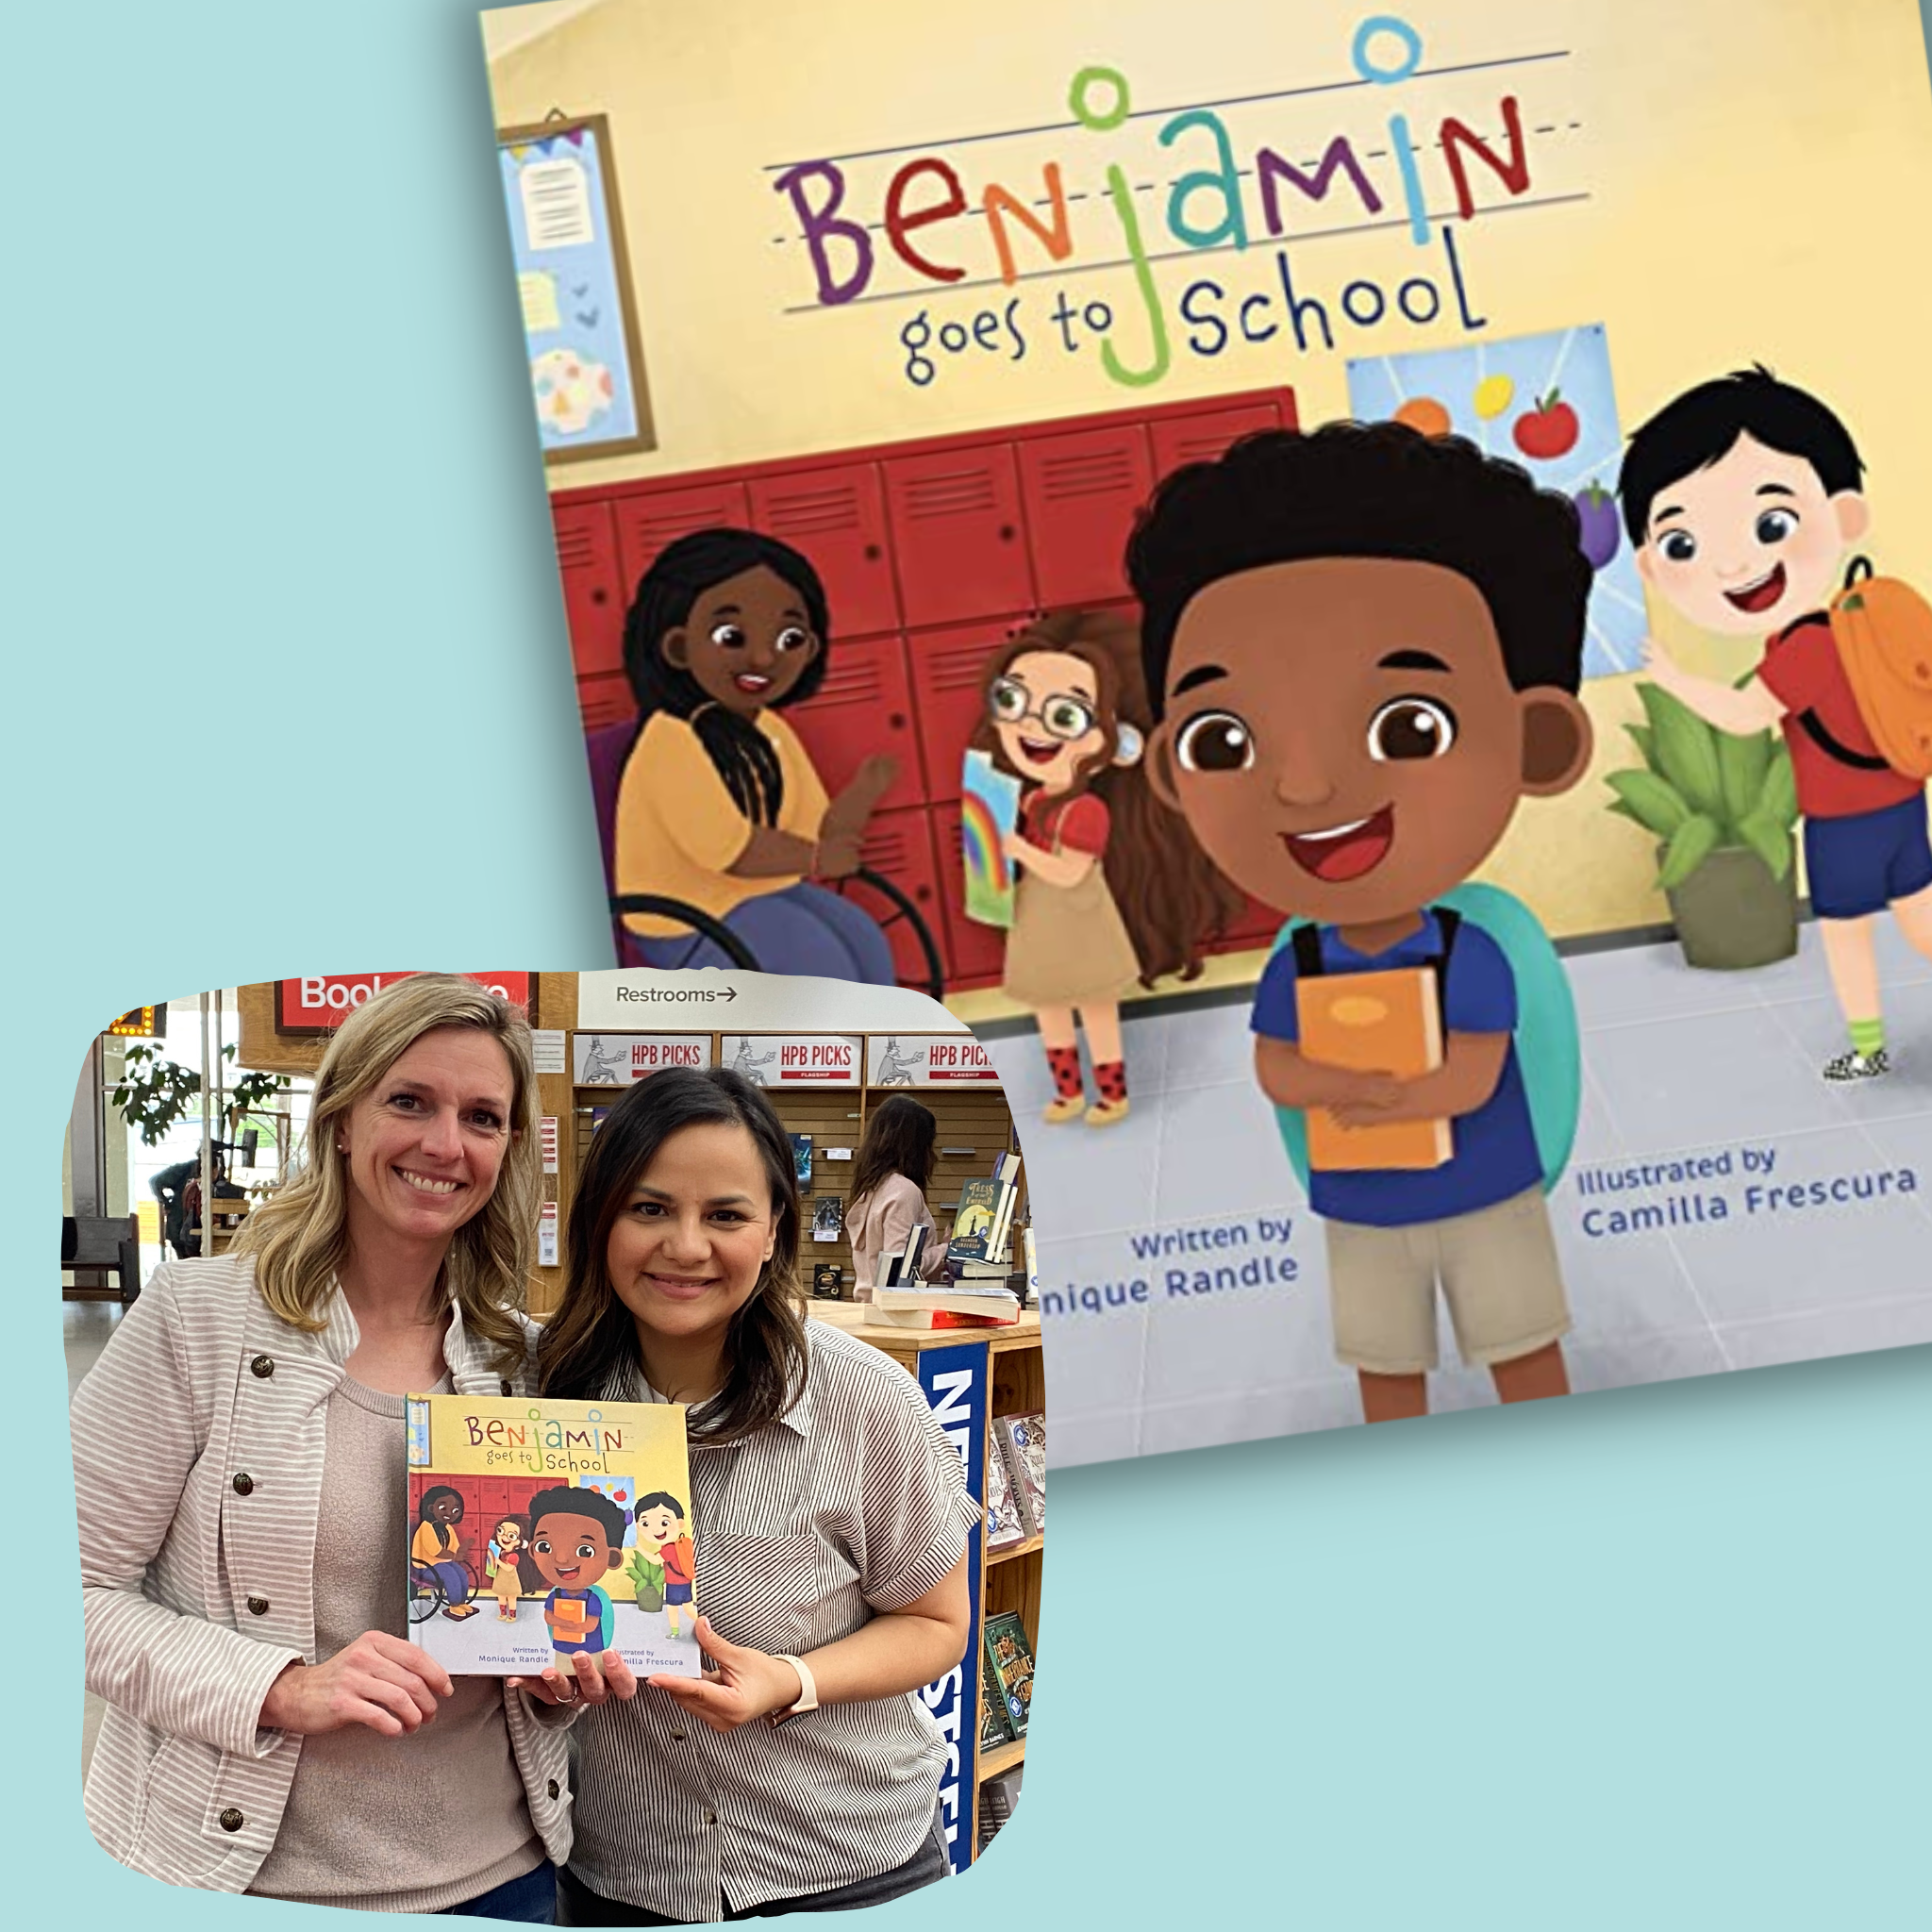 Monique Randle and her self published picture book "Benjamin Goes to School" about her son's disabilities.